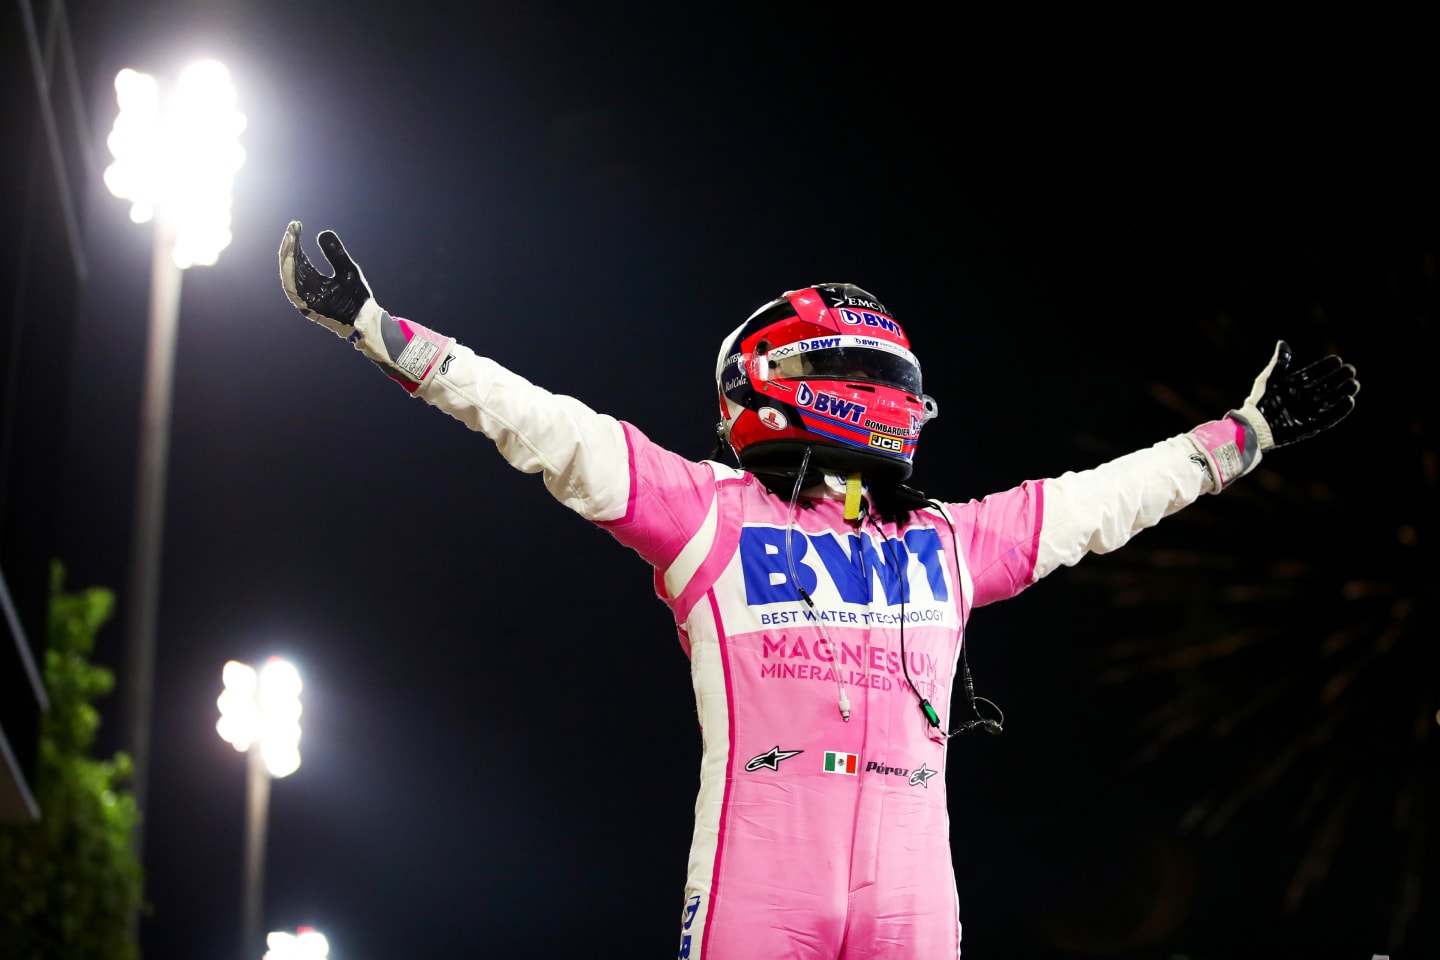 BAHRAIN, BAHRAIN - DECEMBER 06: Race winner Sergio Perez of Mexico and Racing Point celebrates in parc ferme during the F1 Grand Prix of Sakhir at Bahrain International Circuit on December 06, 2020 in Bahrain, Bahrain. (Photo by Bryn Lennon/Getty Images)